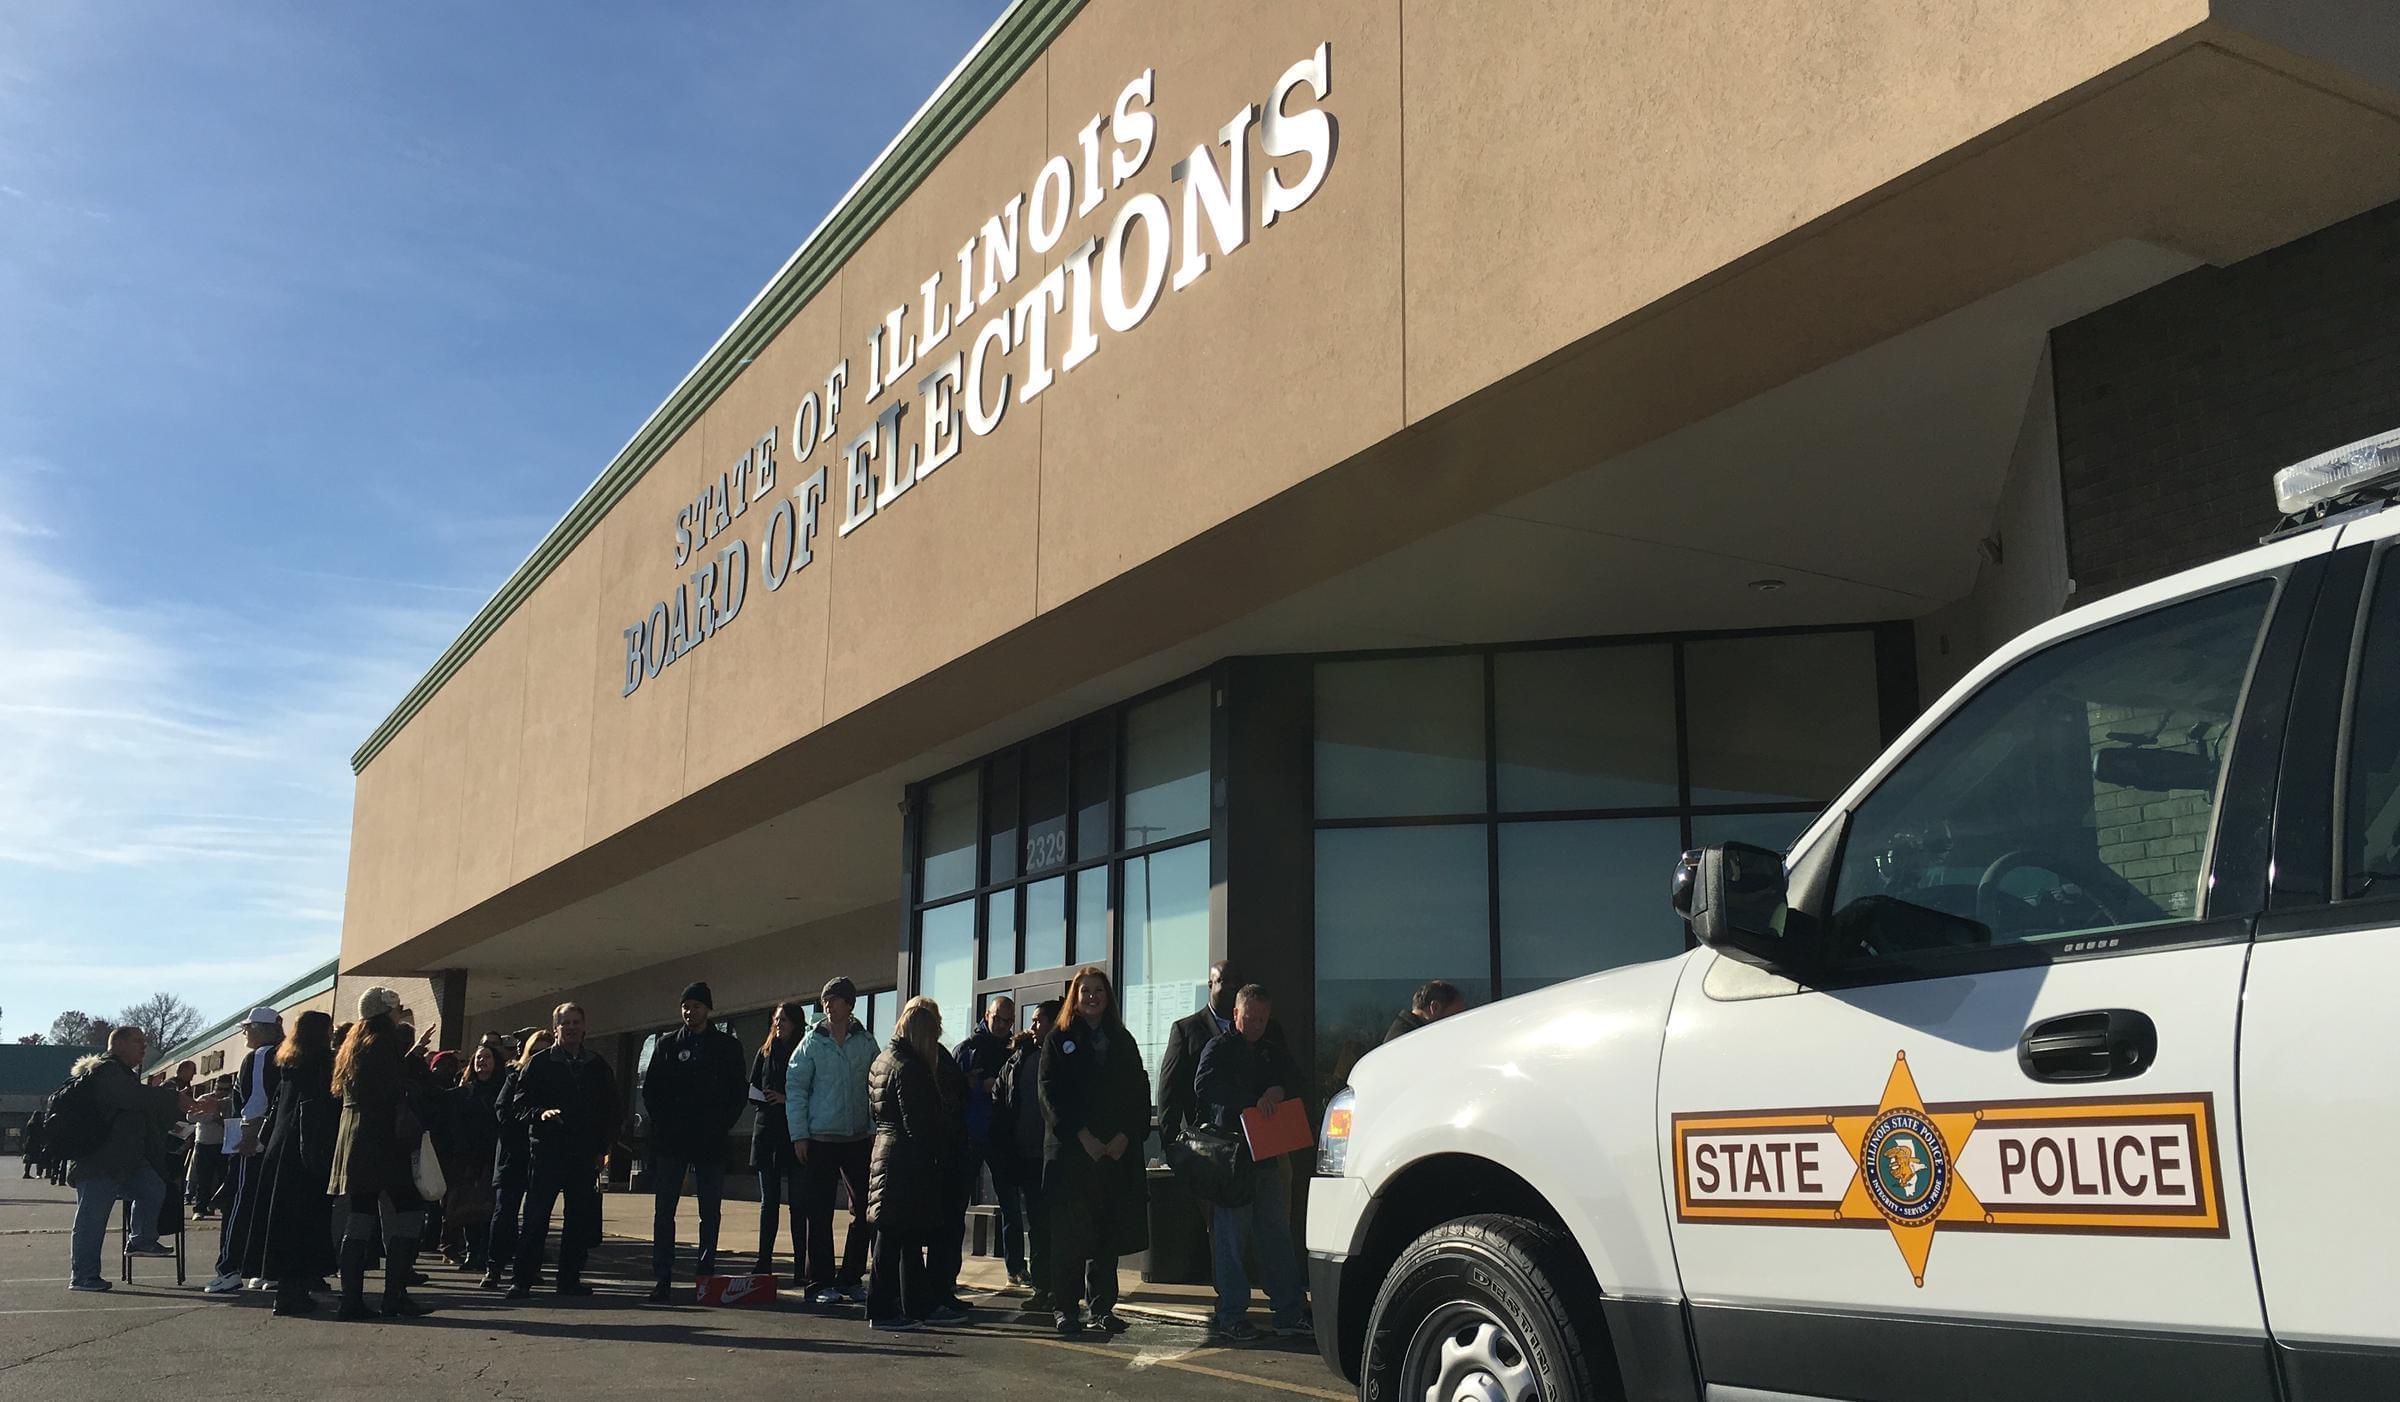 Candidates and campaign staff lined up before 8 a.m. Monday in order to have a chance at being listed first on the March 2018 primary election ballot.